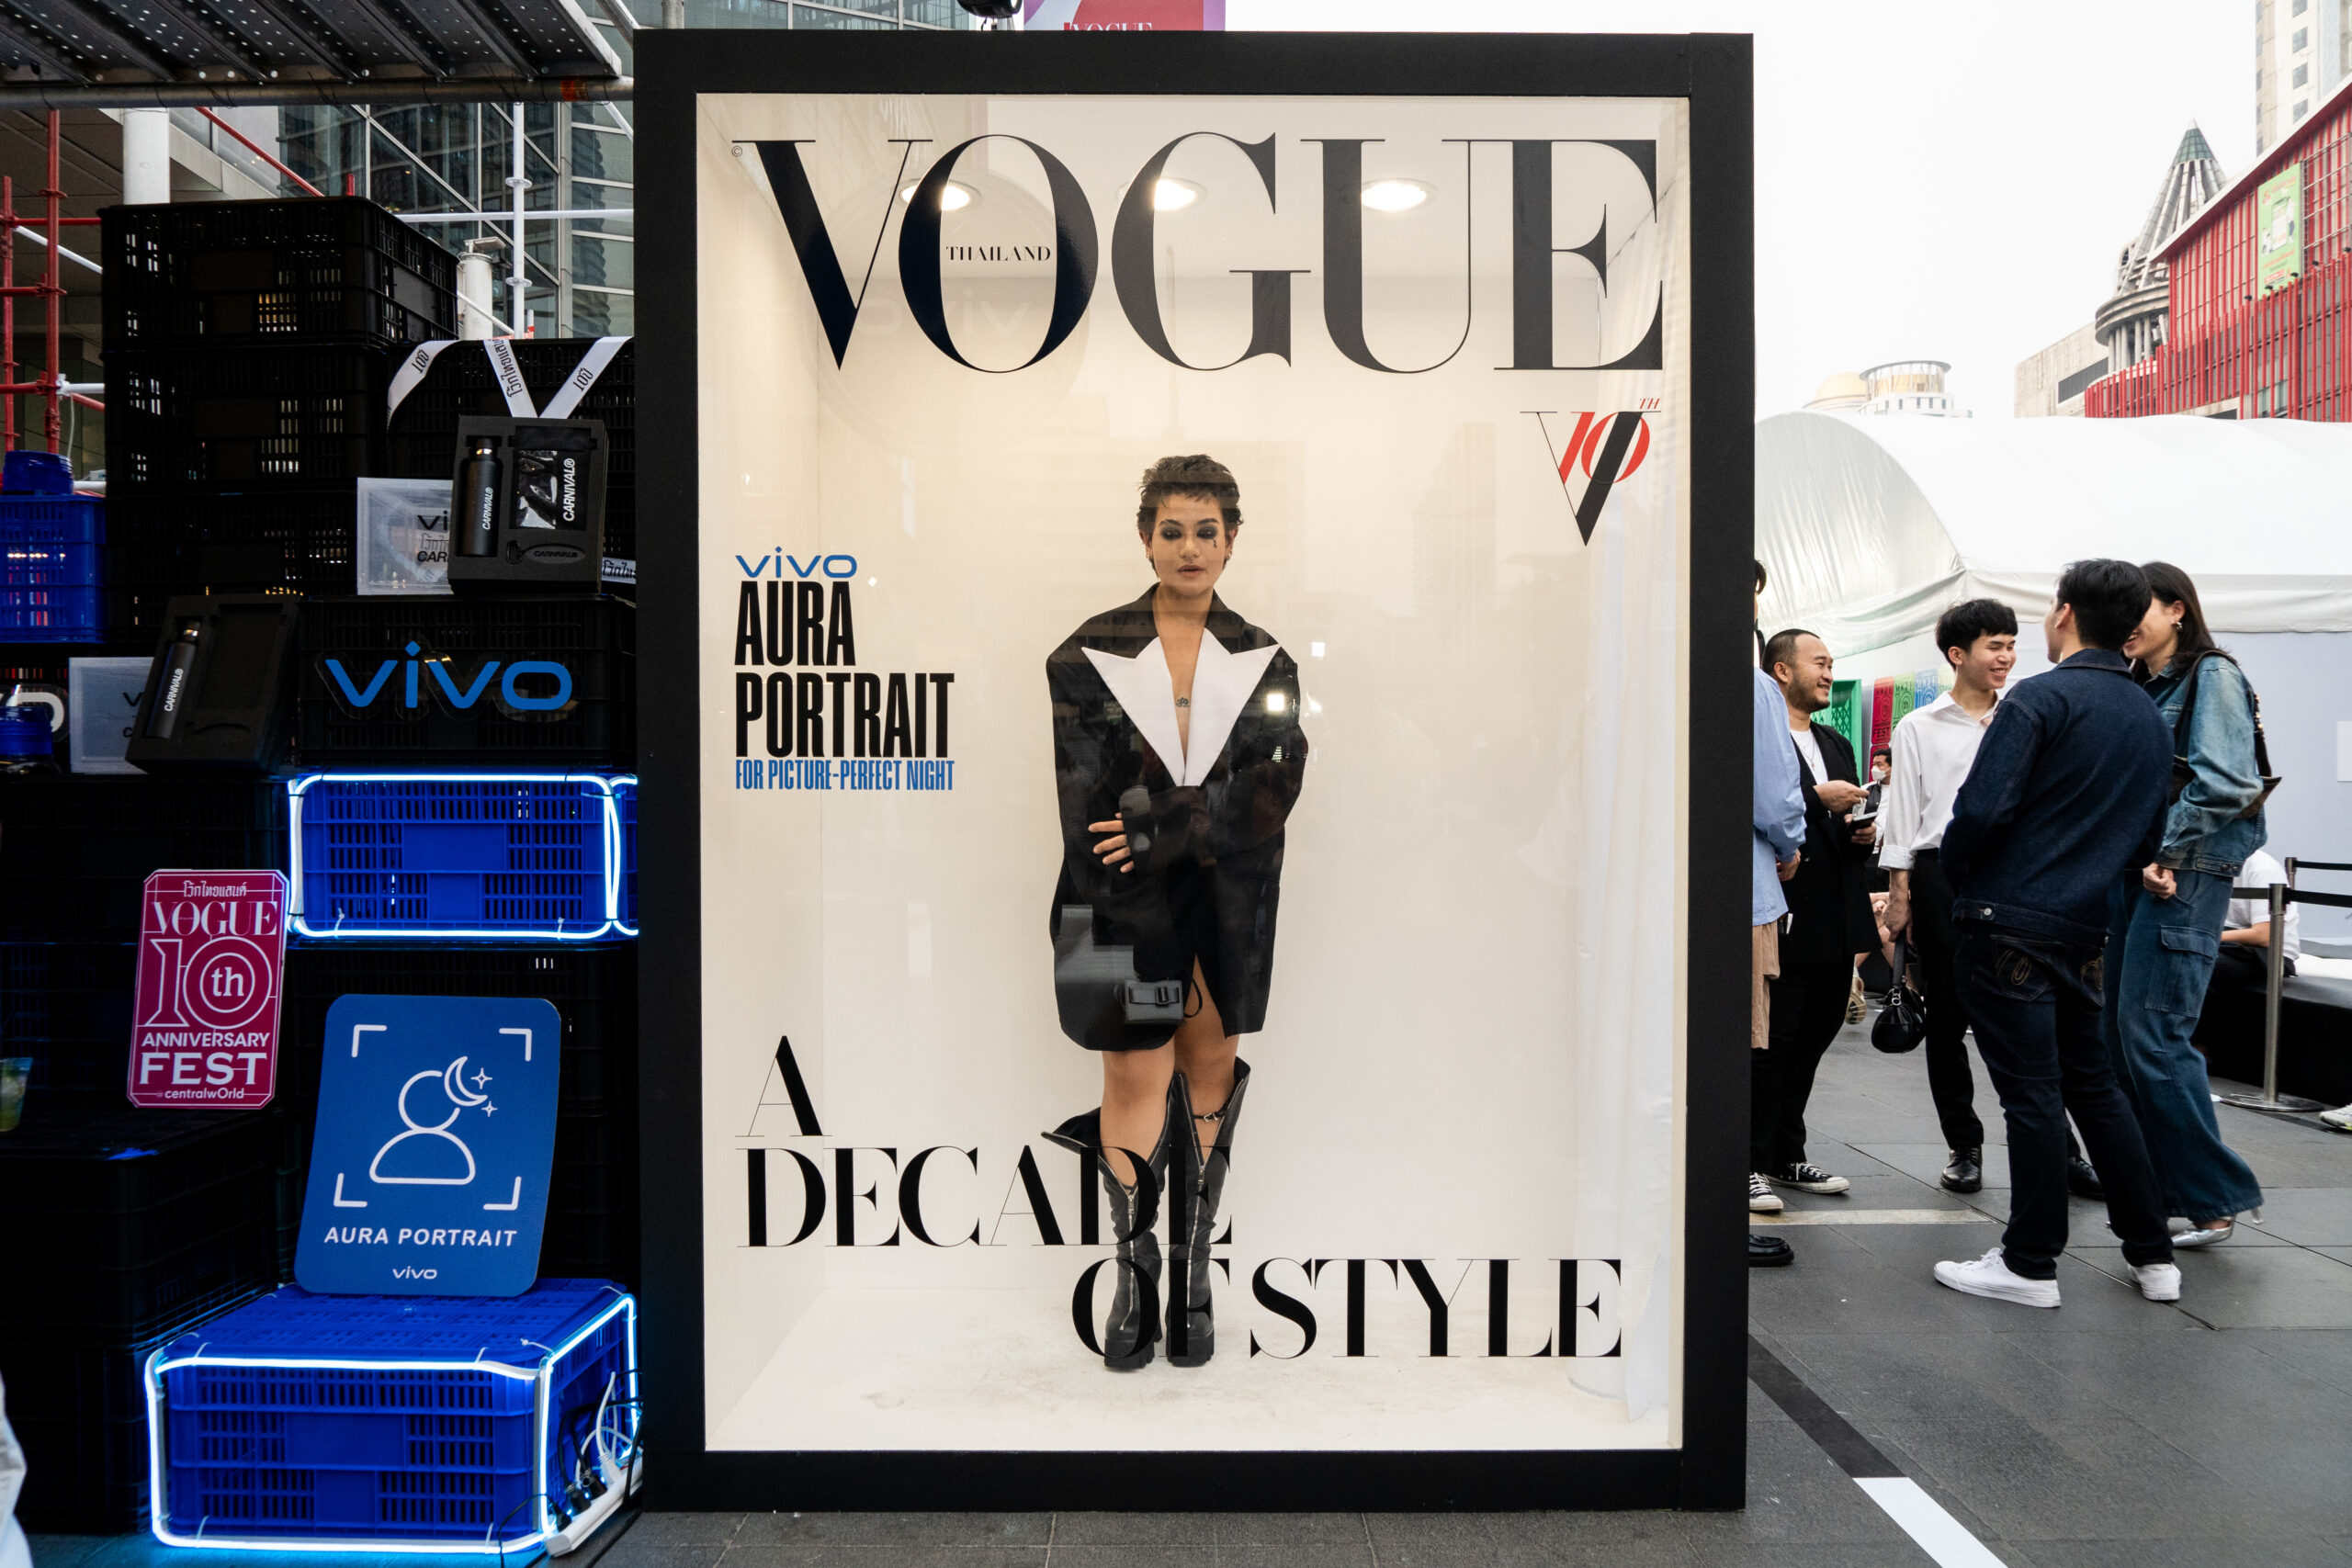 SILVY poses for a photo in a photo box magazine cover commemorating 'A Decade of Style' for VOGUE Thailand. VOGUE celebrates the 10th anniversary of its magazine in Thailand with a fashion show spotlighting Thai designers at Central World Square in Bangkok, Thailand, on March 10, 2023.